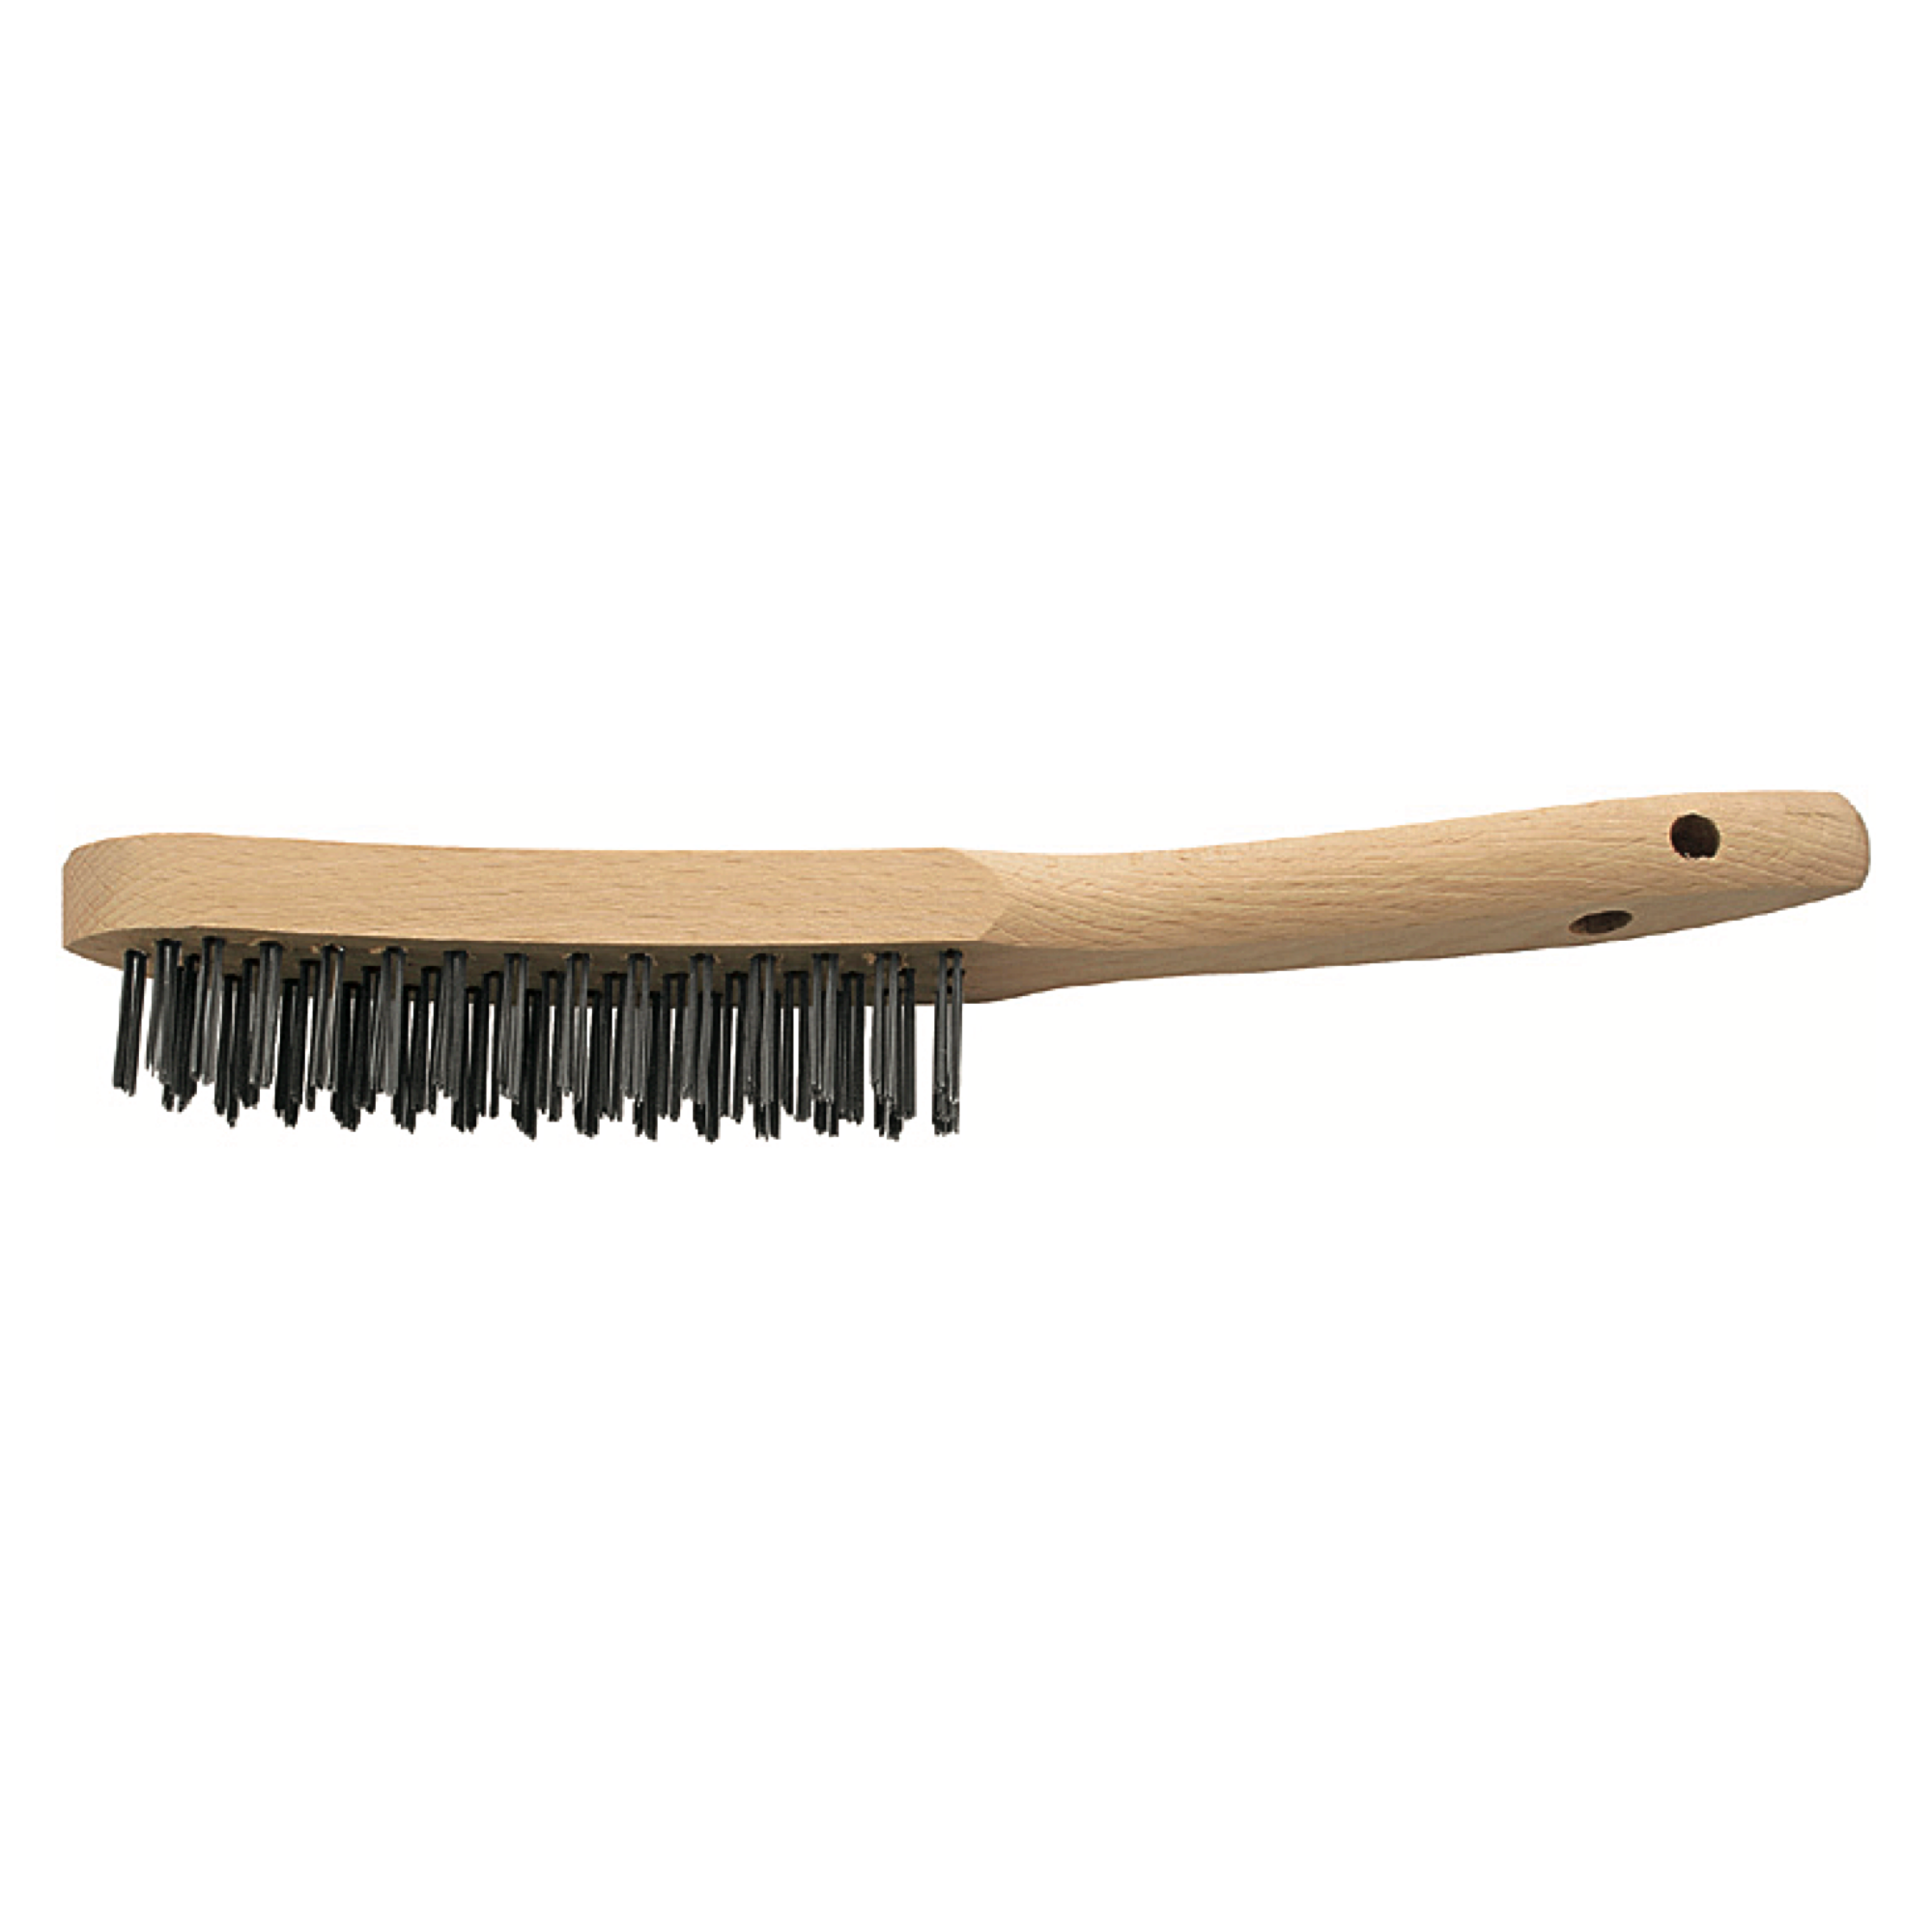 ELORA 250 Wire Brush with Wooden Handle (ELORA Tools) - Premium Wire Brush from ELORA - Shop now at Yew Aik.